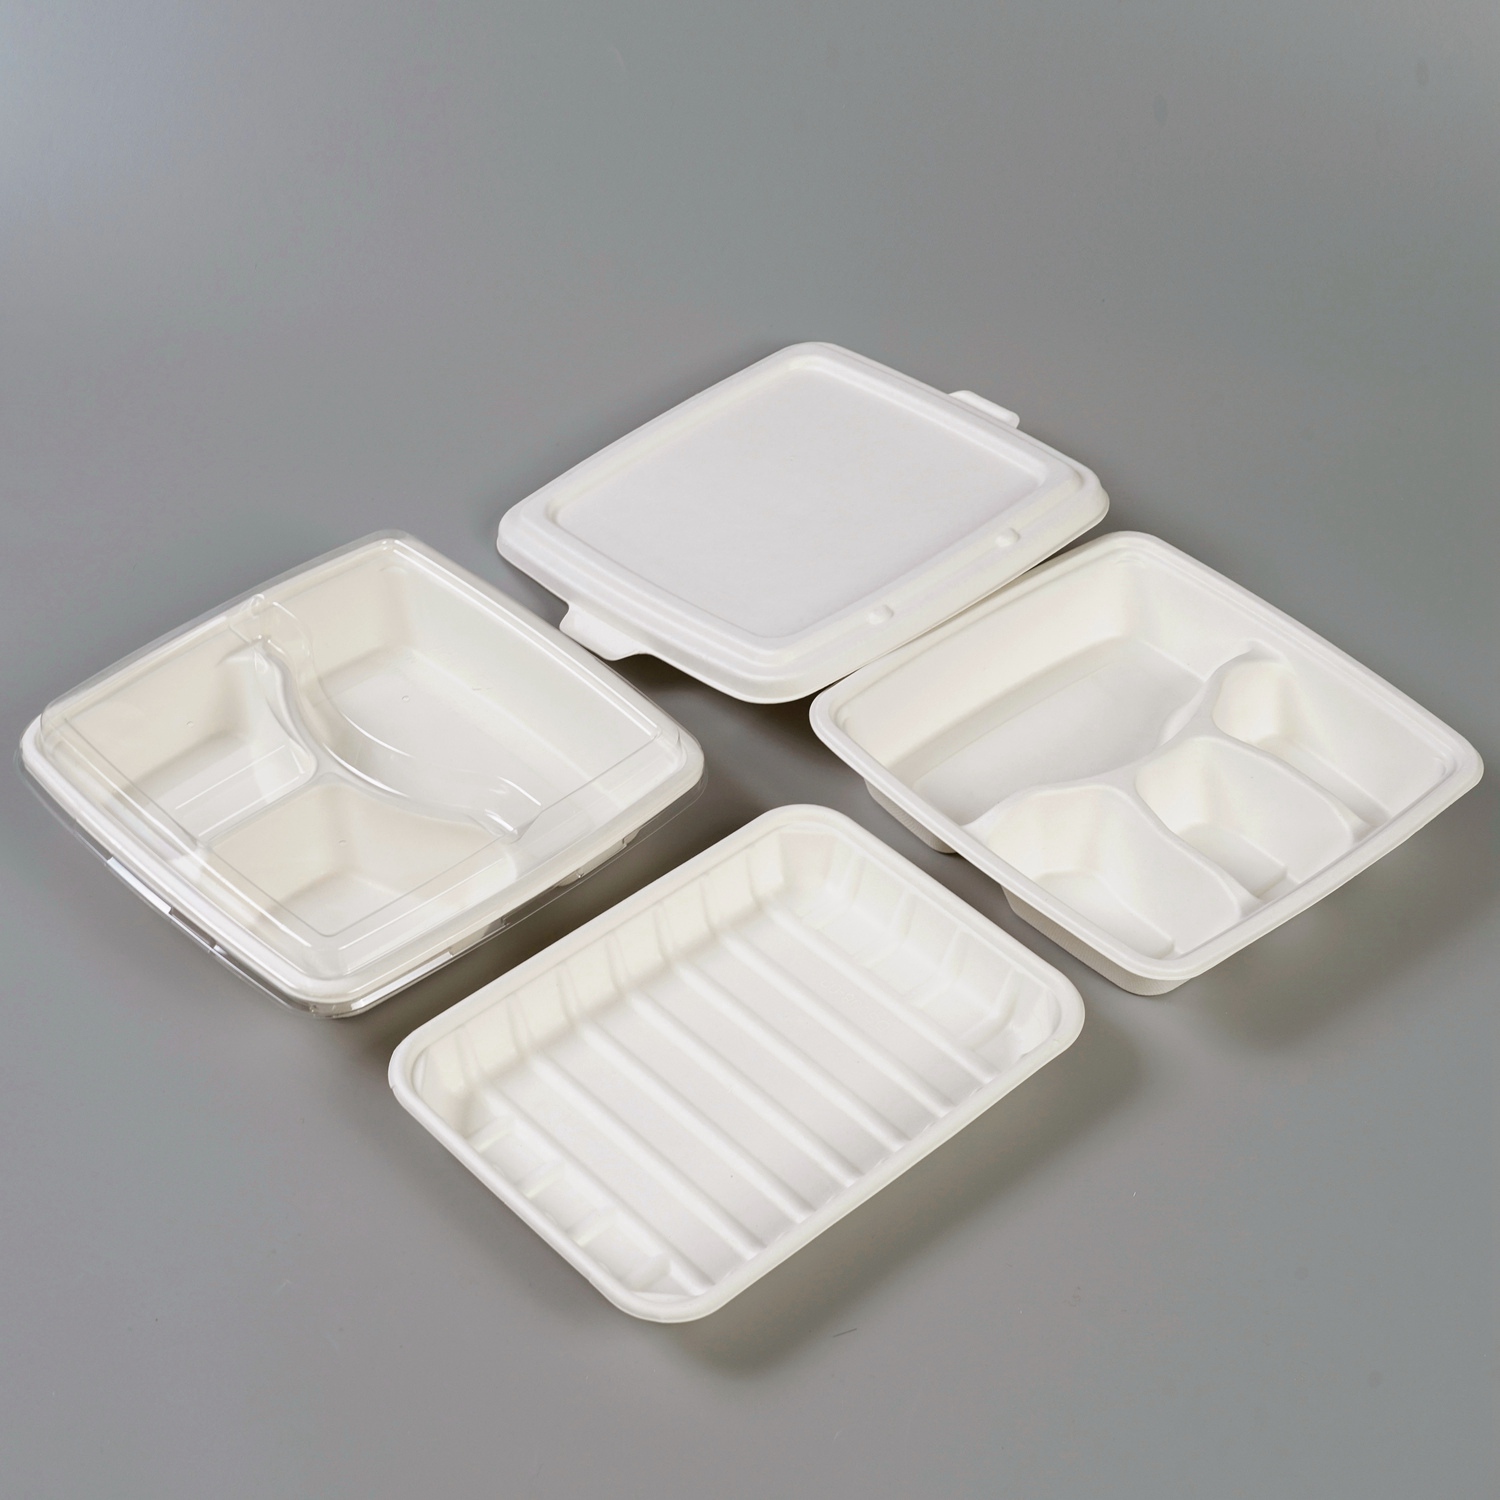 What is the differences between PFAS free and Normal Bagasse Food Packaging Products? Bagasse Food Container, Biodegradable Tableware, compostable and biodegraadable